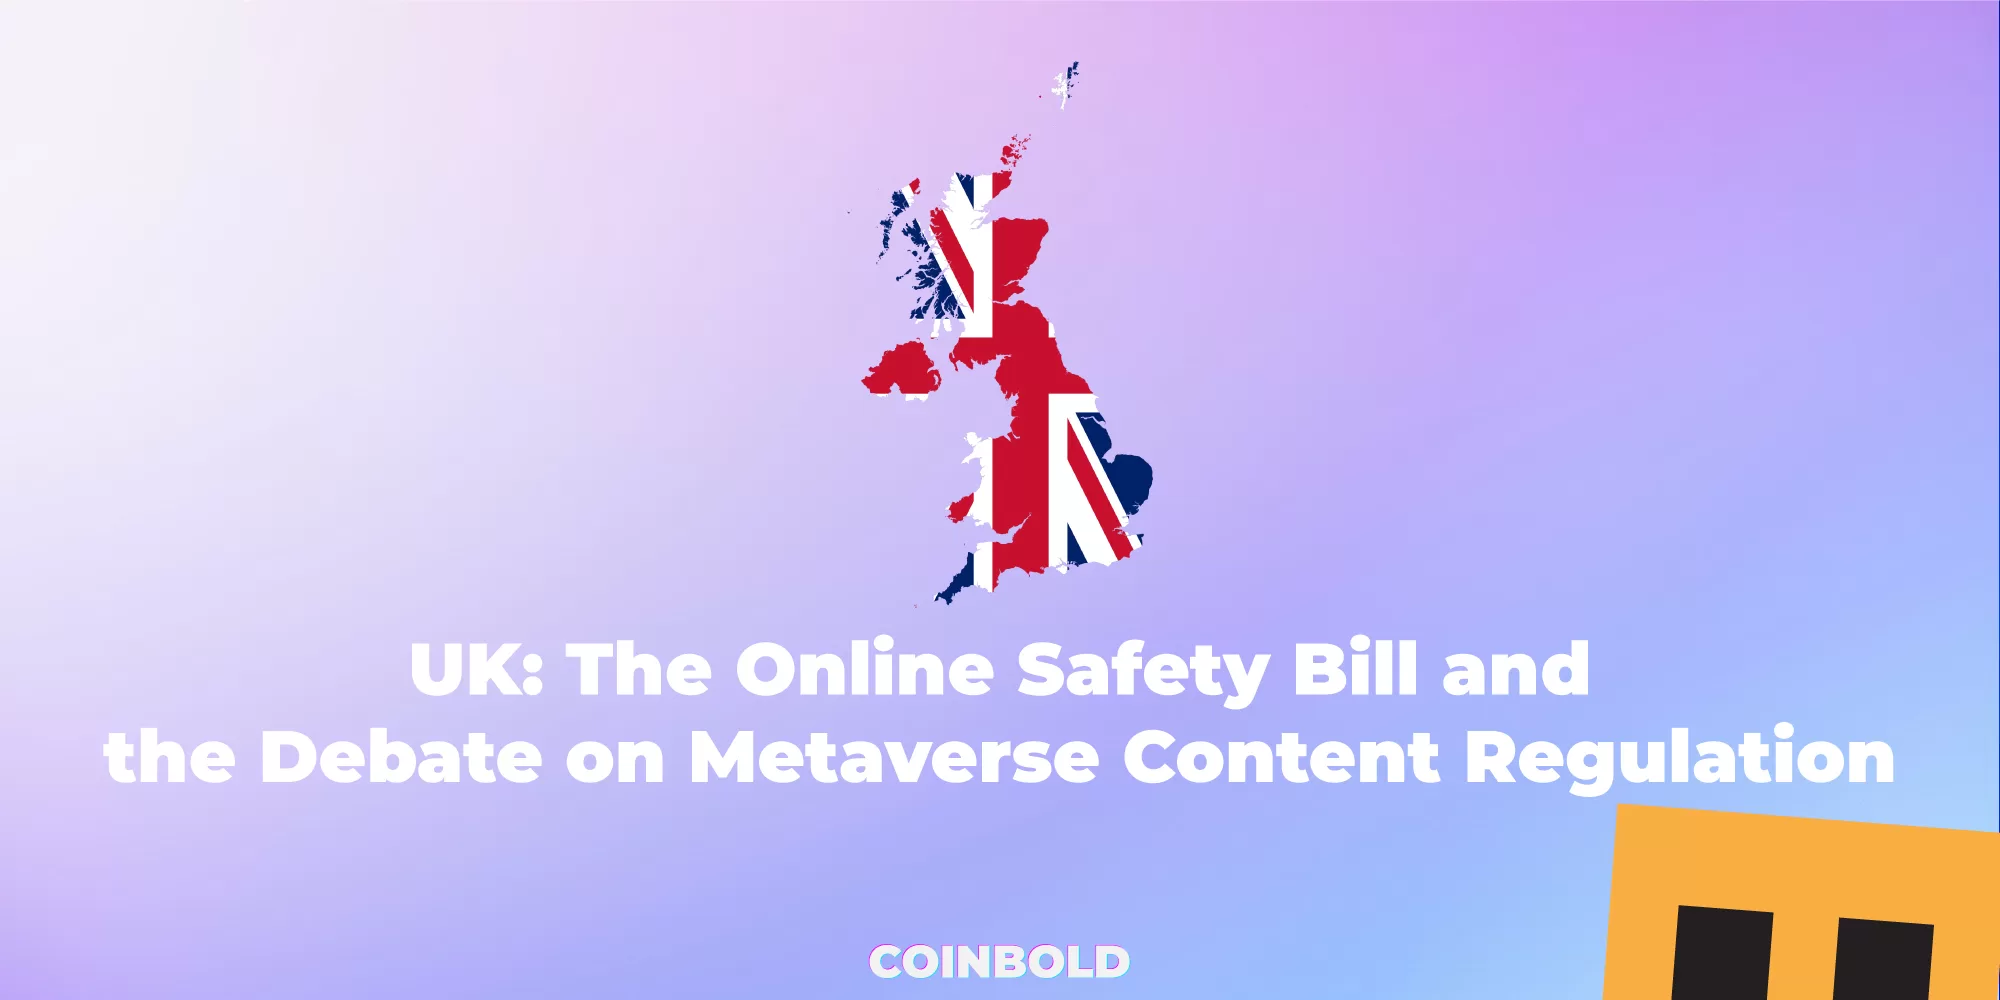 UK: The Online Safety Bill and the Debate on Metaverse Content Regulation